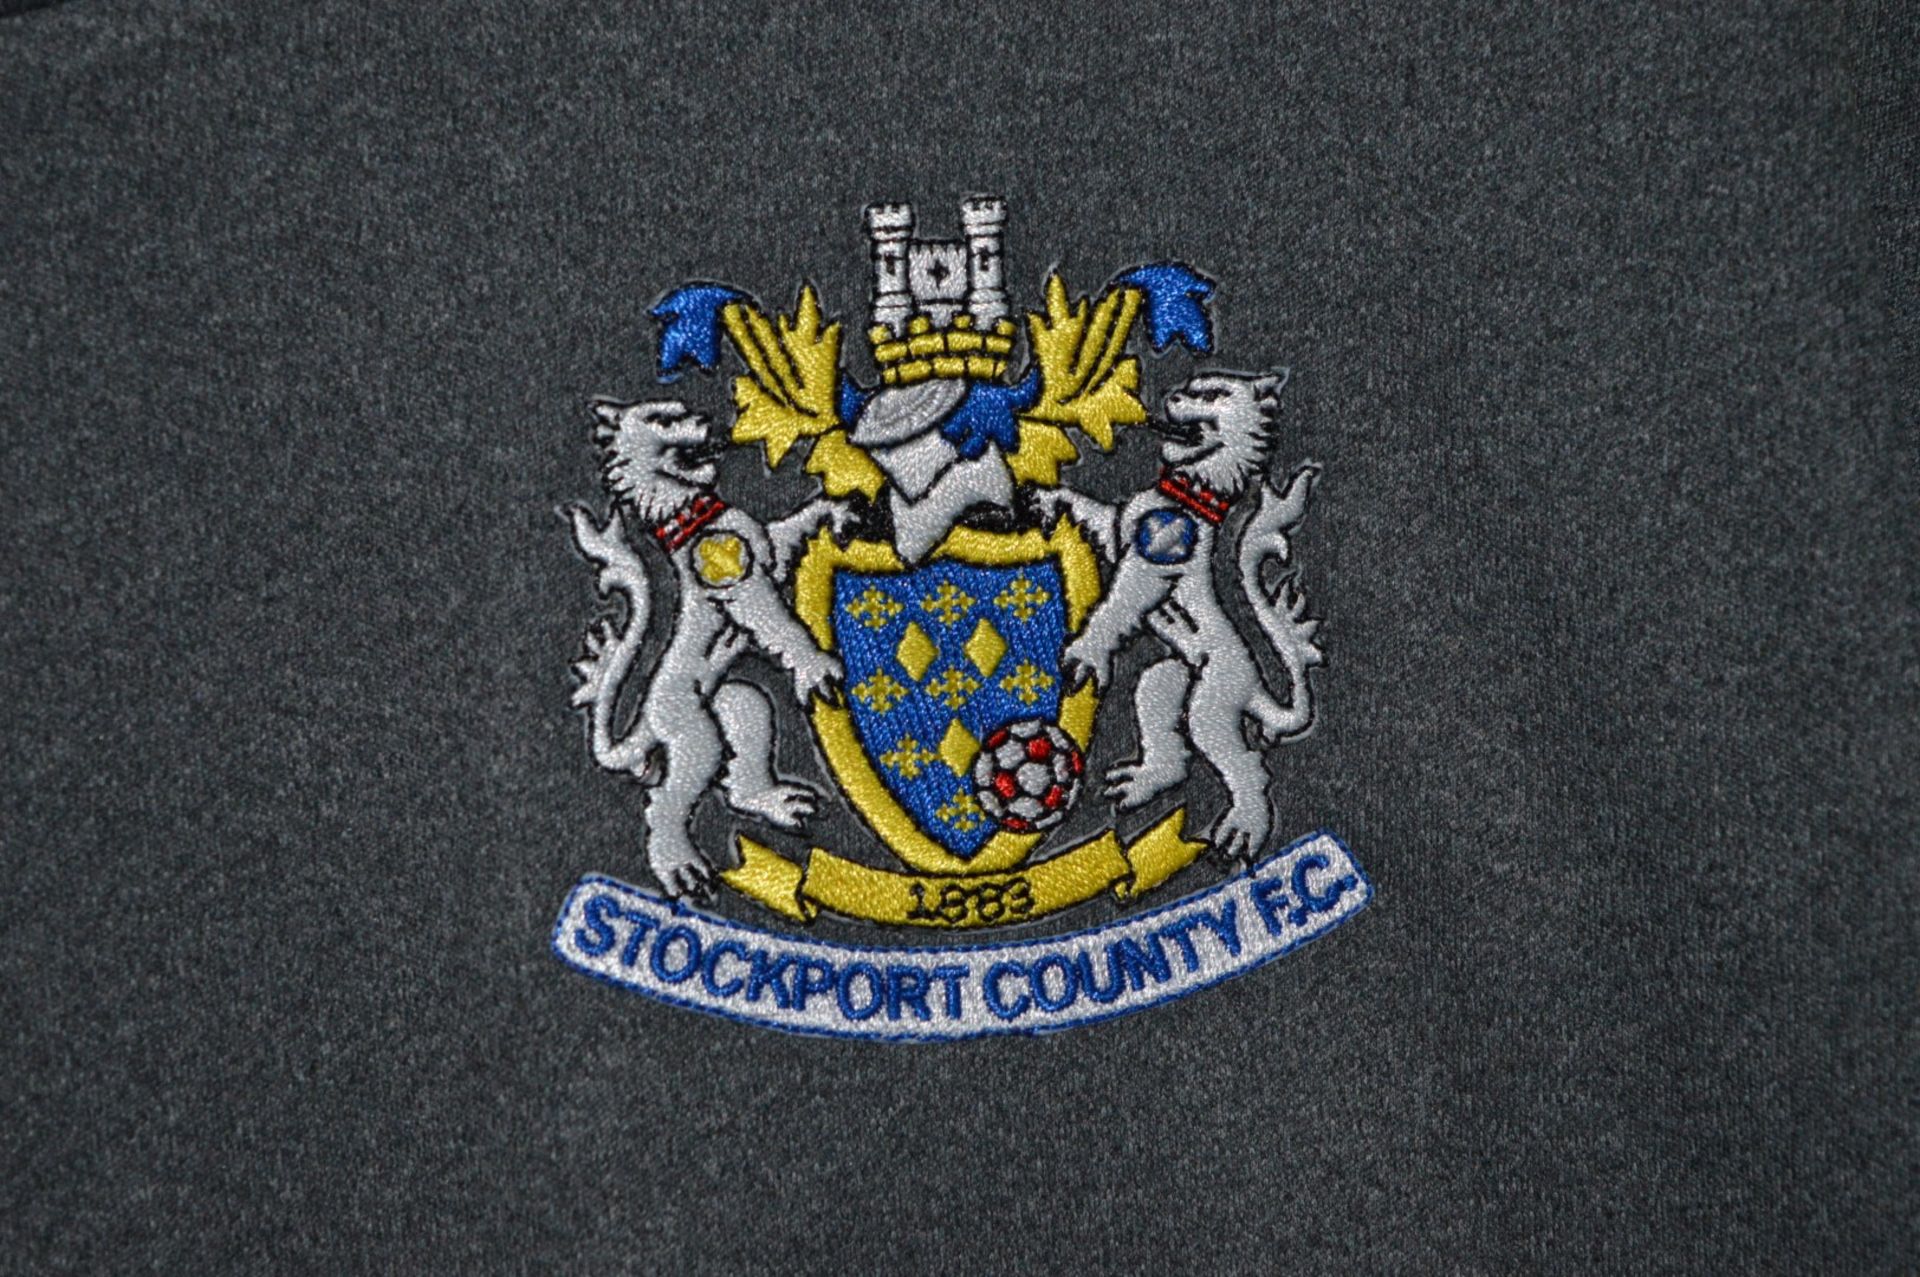 1 x Stockport County Signed Football Shirt - 2016/2017 Season Away Shirt Signed By 11 Players - - Image 13 of 13